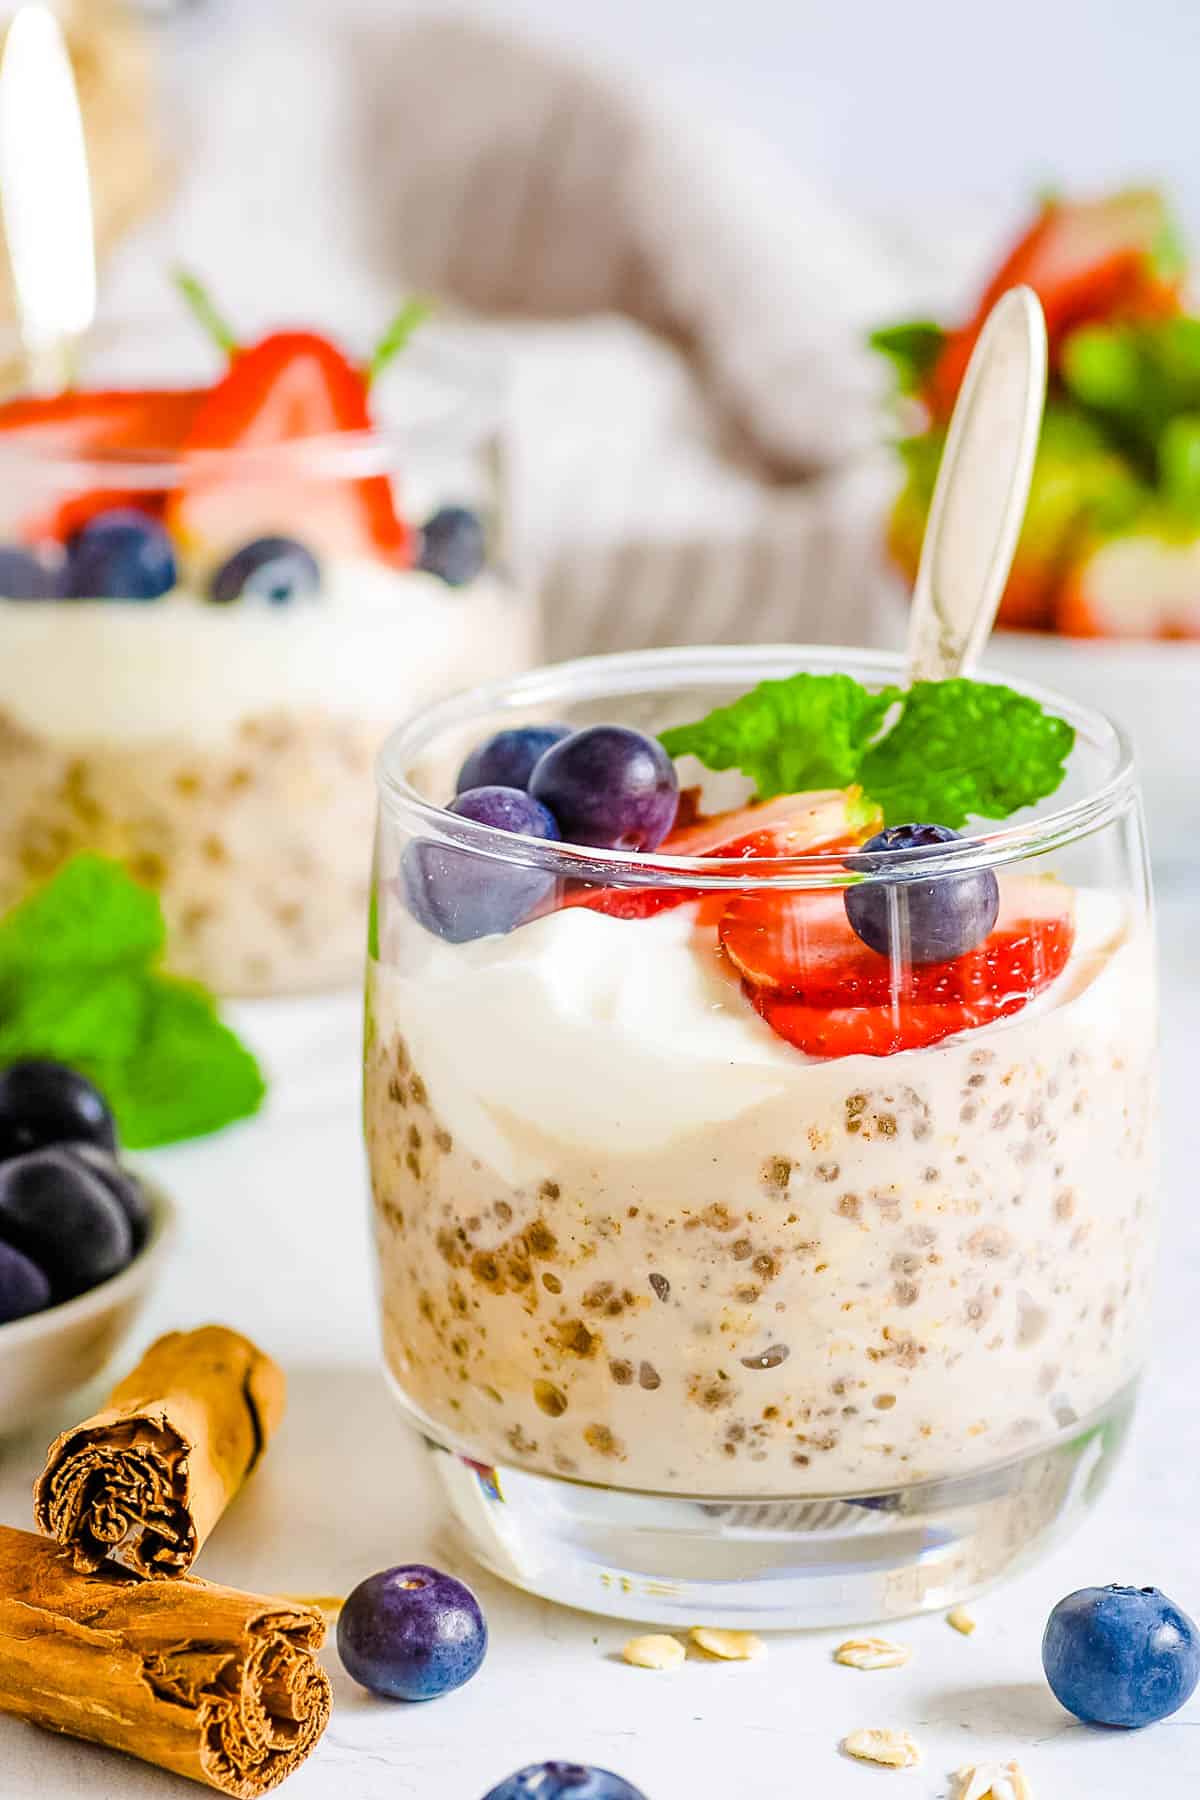 Vegan high protein overnight oats served in glasses with fresh berries and mint as a garnish.